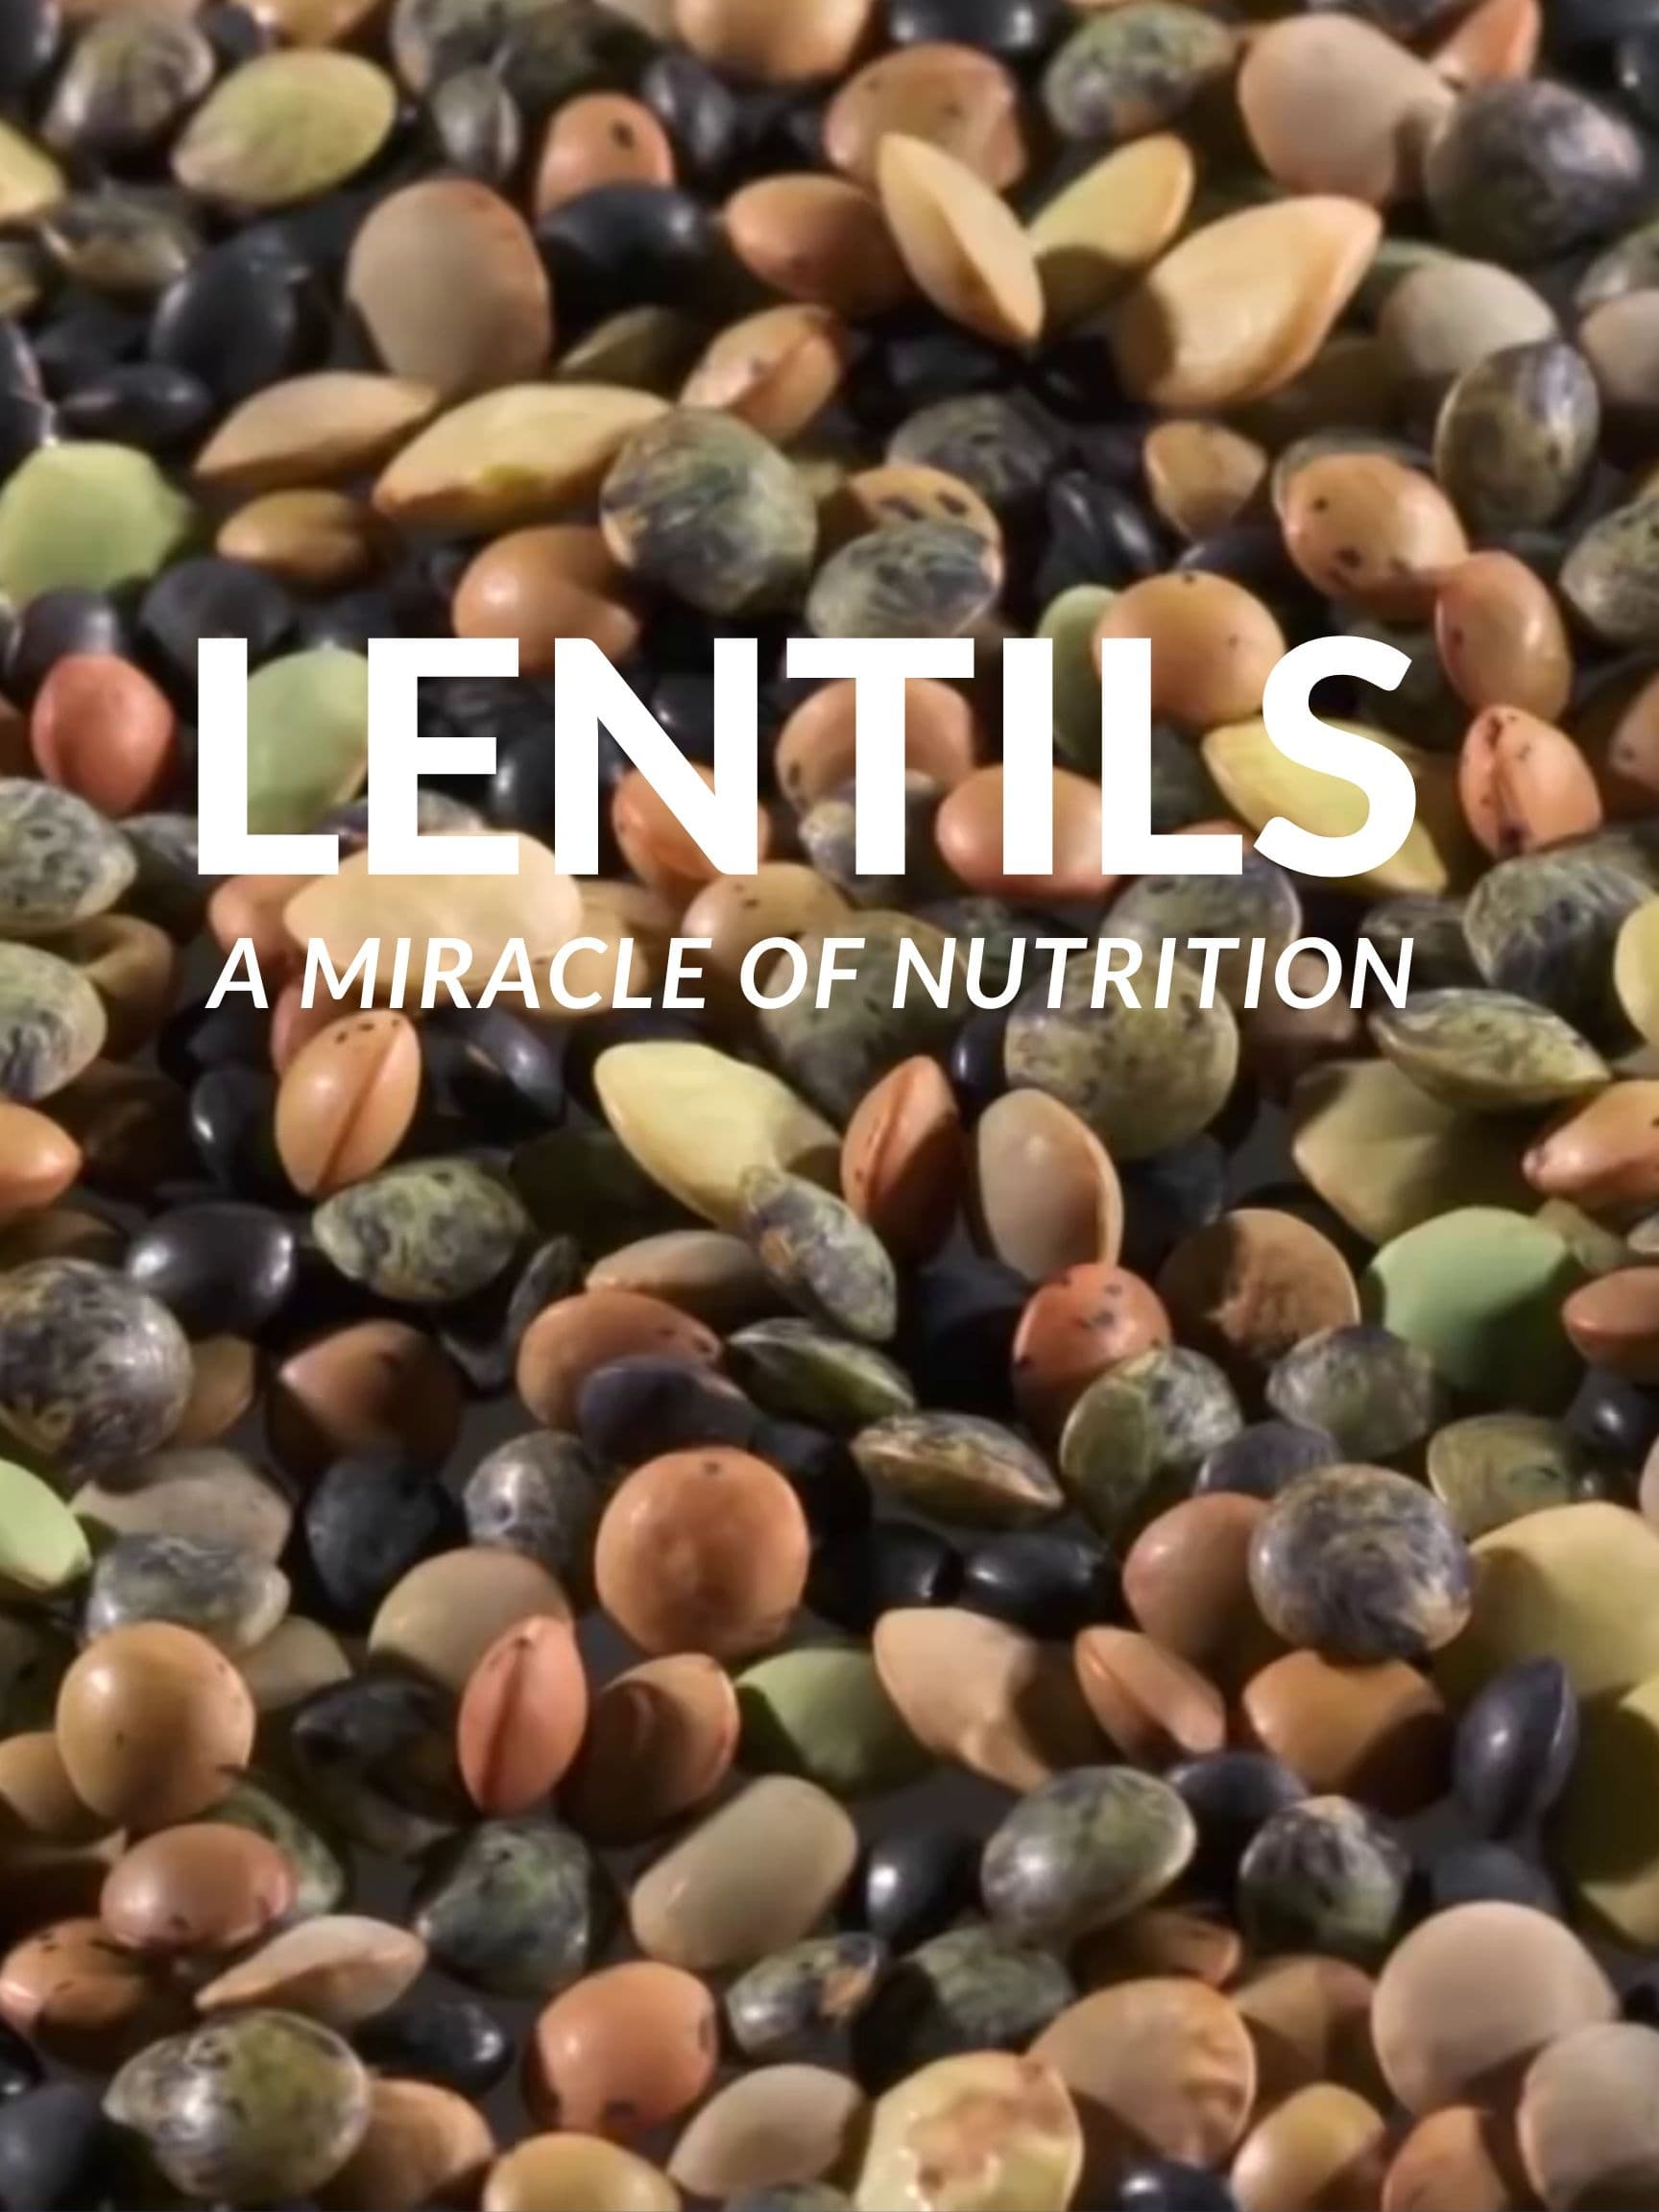 Lentils: A Miracle Of Nutrition